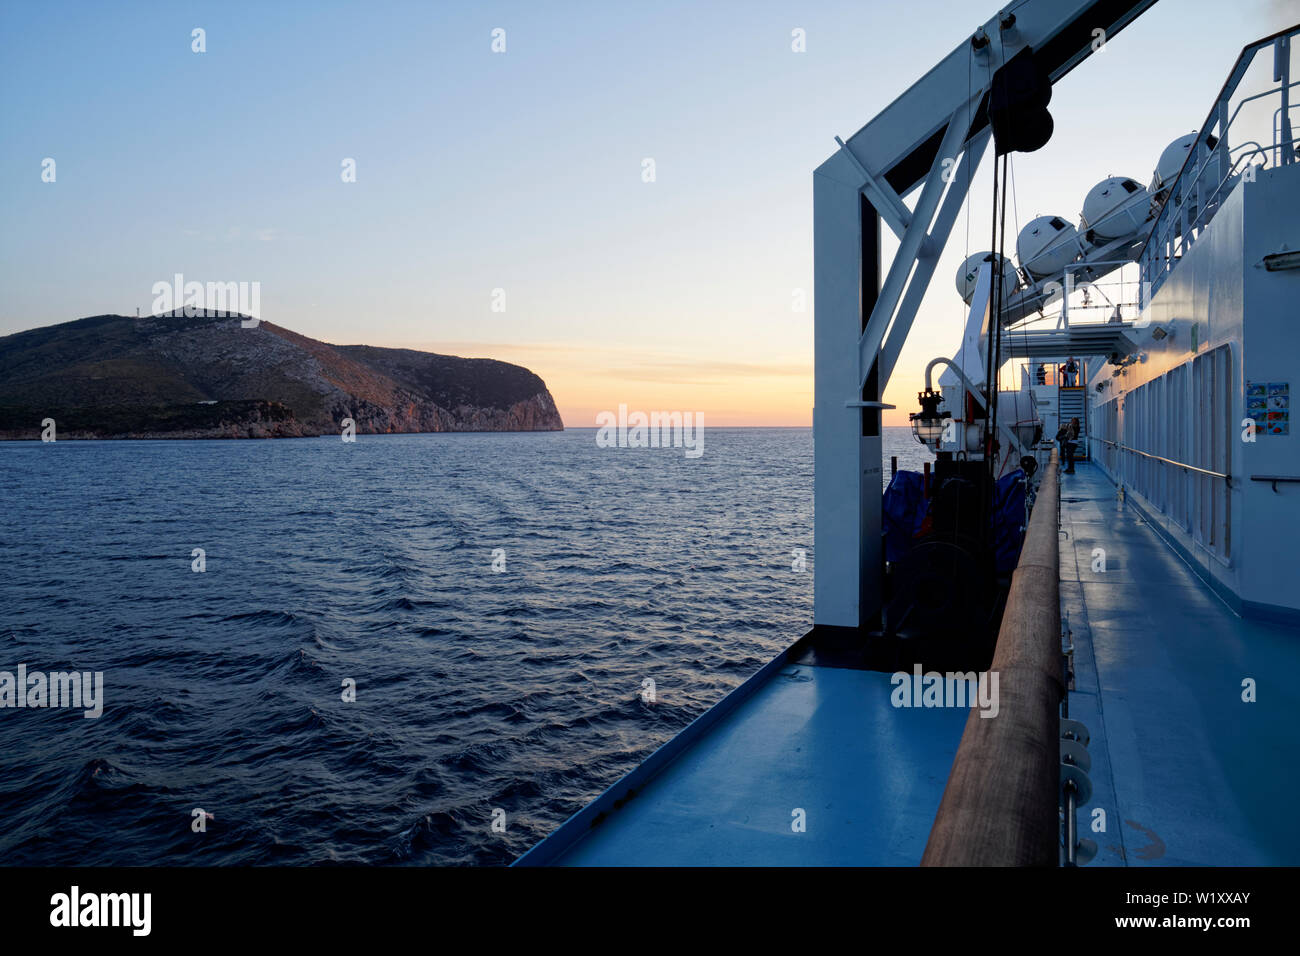 Sunrise view from a ferry (corsica ferries) on the way to Golfo Aranci (Sardinia) from Livorno (italy) Stock Photo